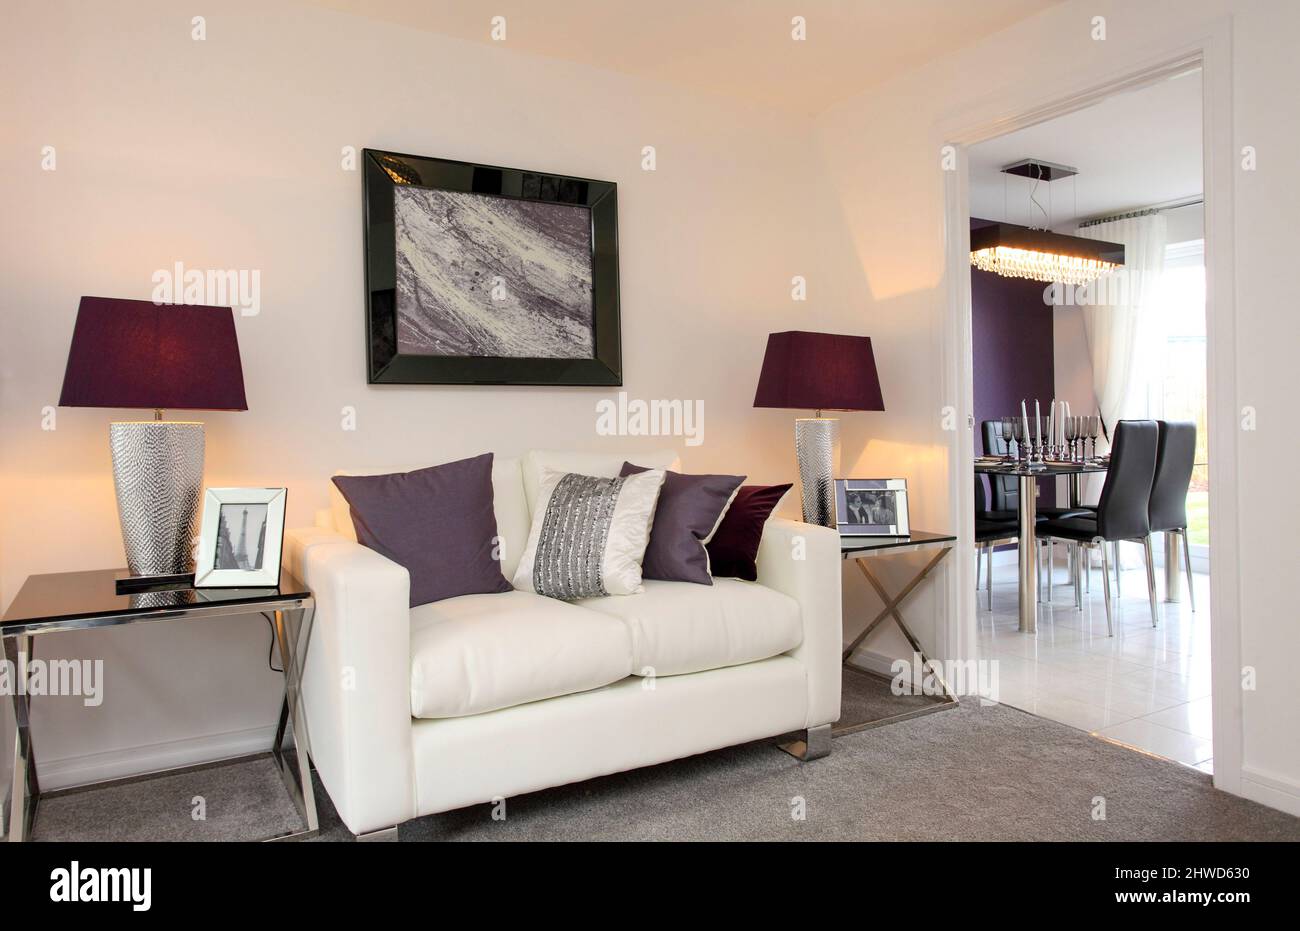 Sofa with side tables, view through to dining area in modern showhome Stock Photo